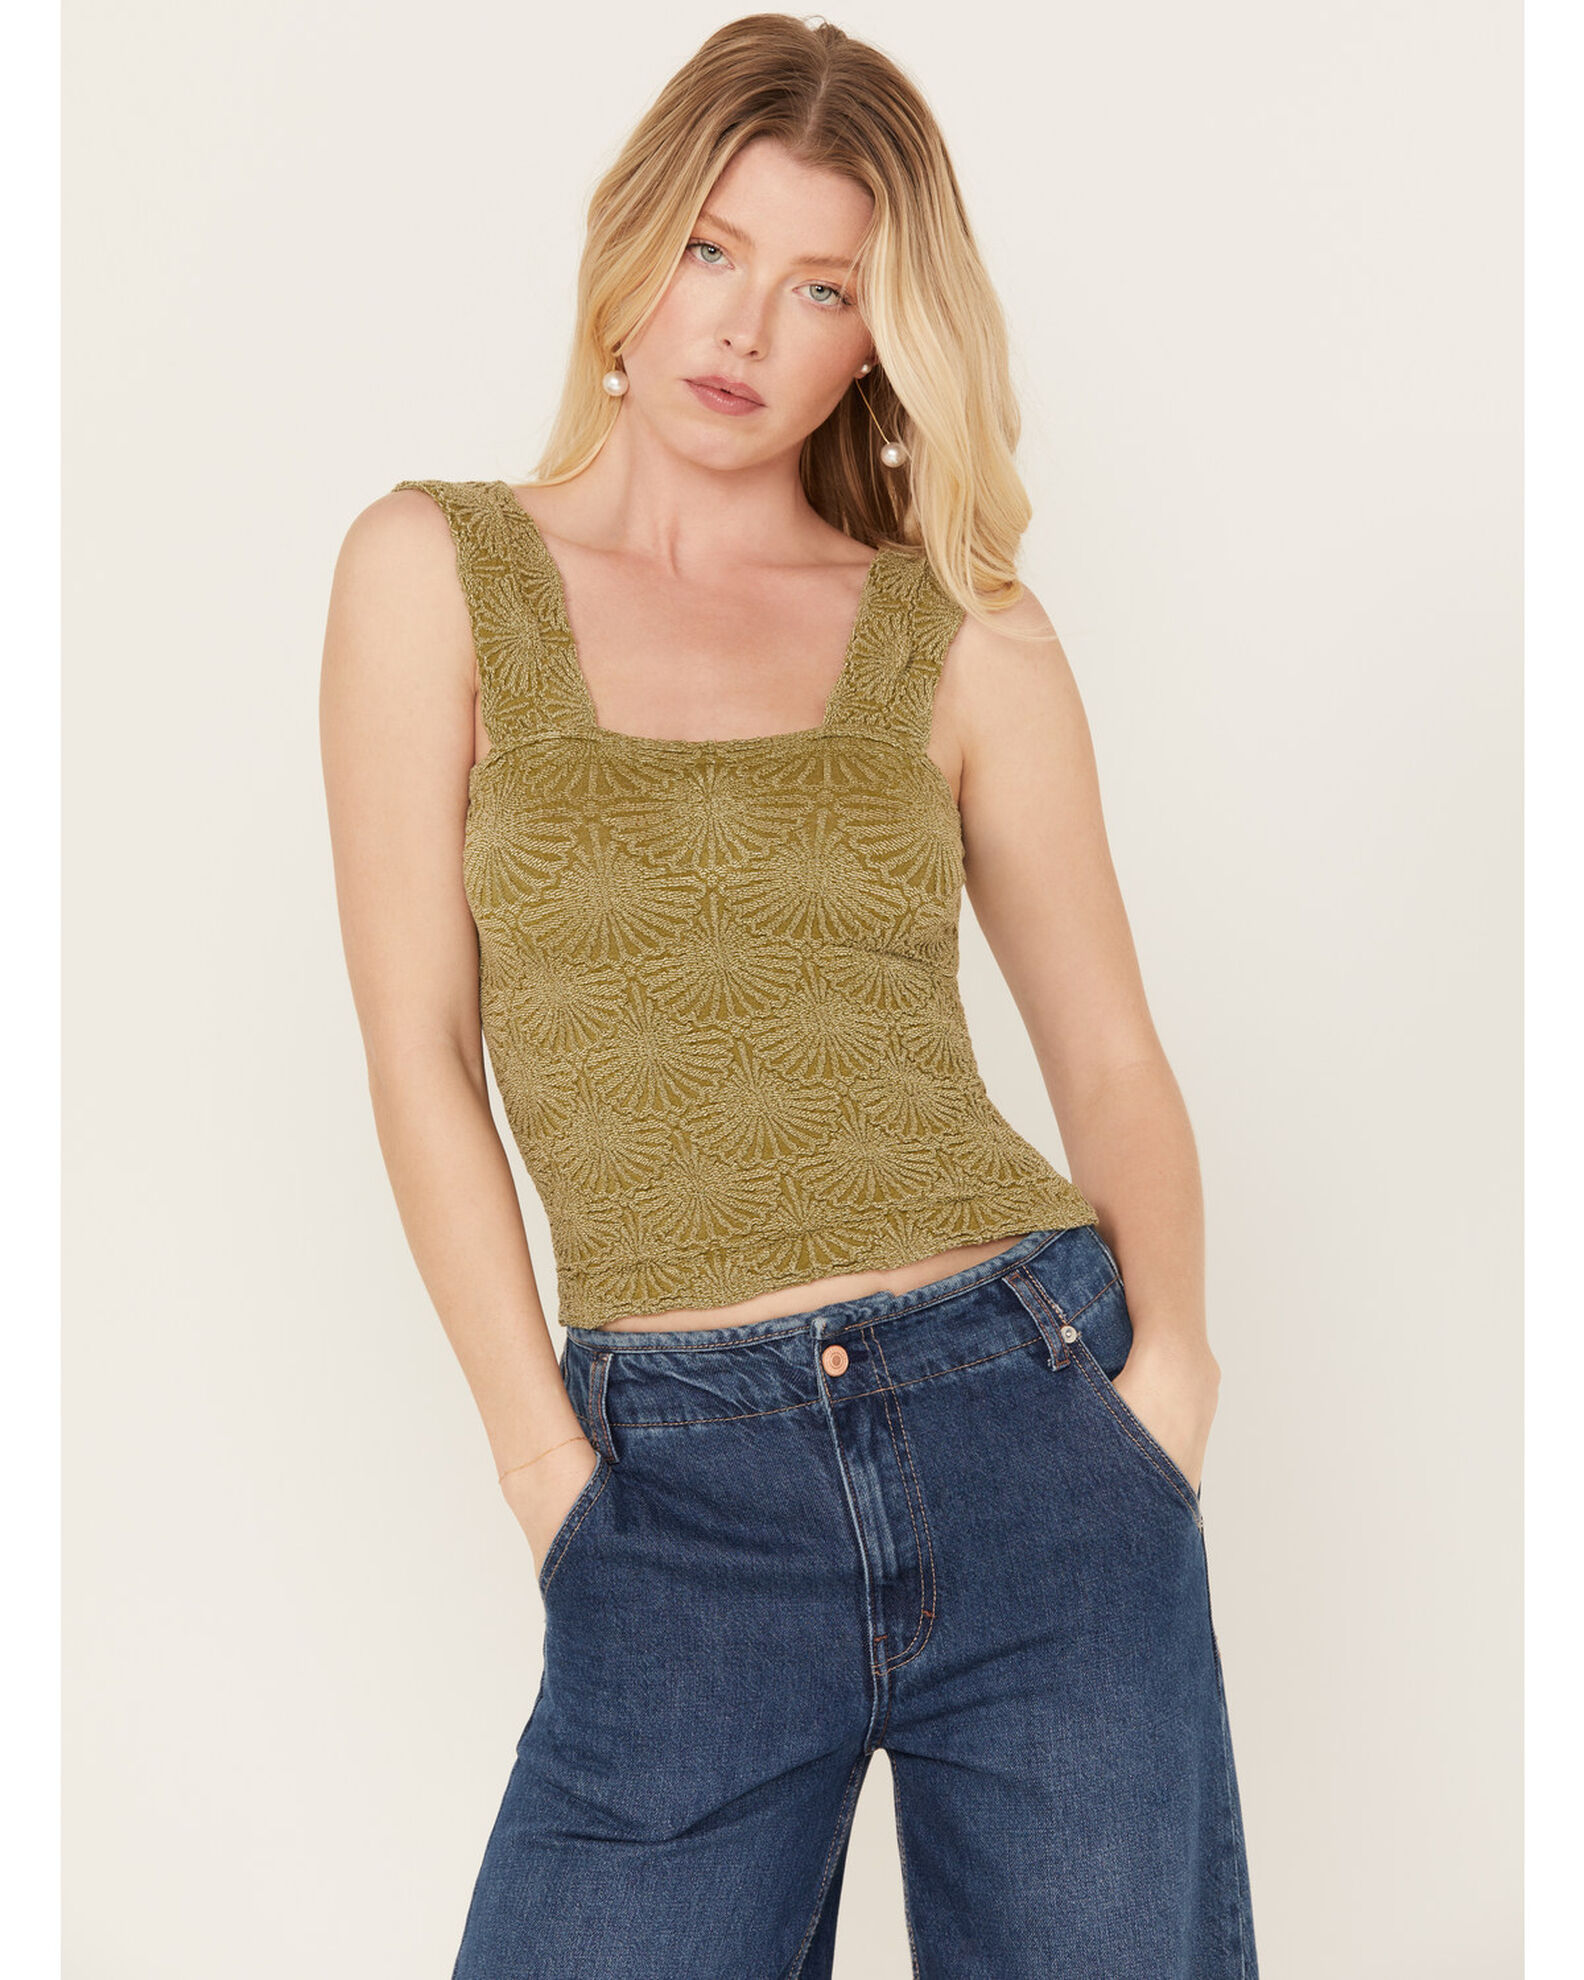 Free People Women's Floral Camisole Tank Top | Boot Barn